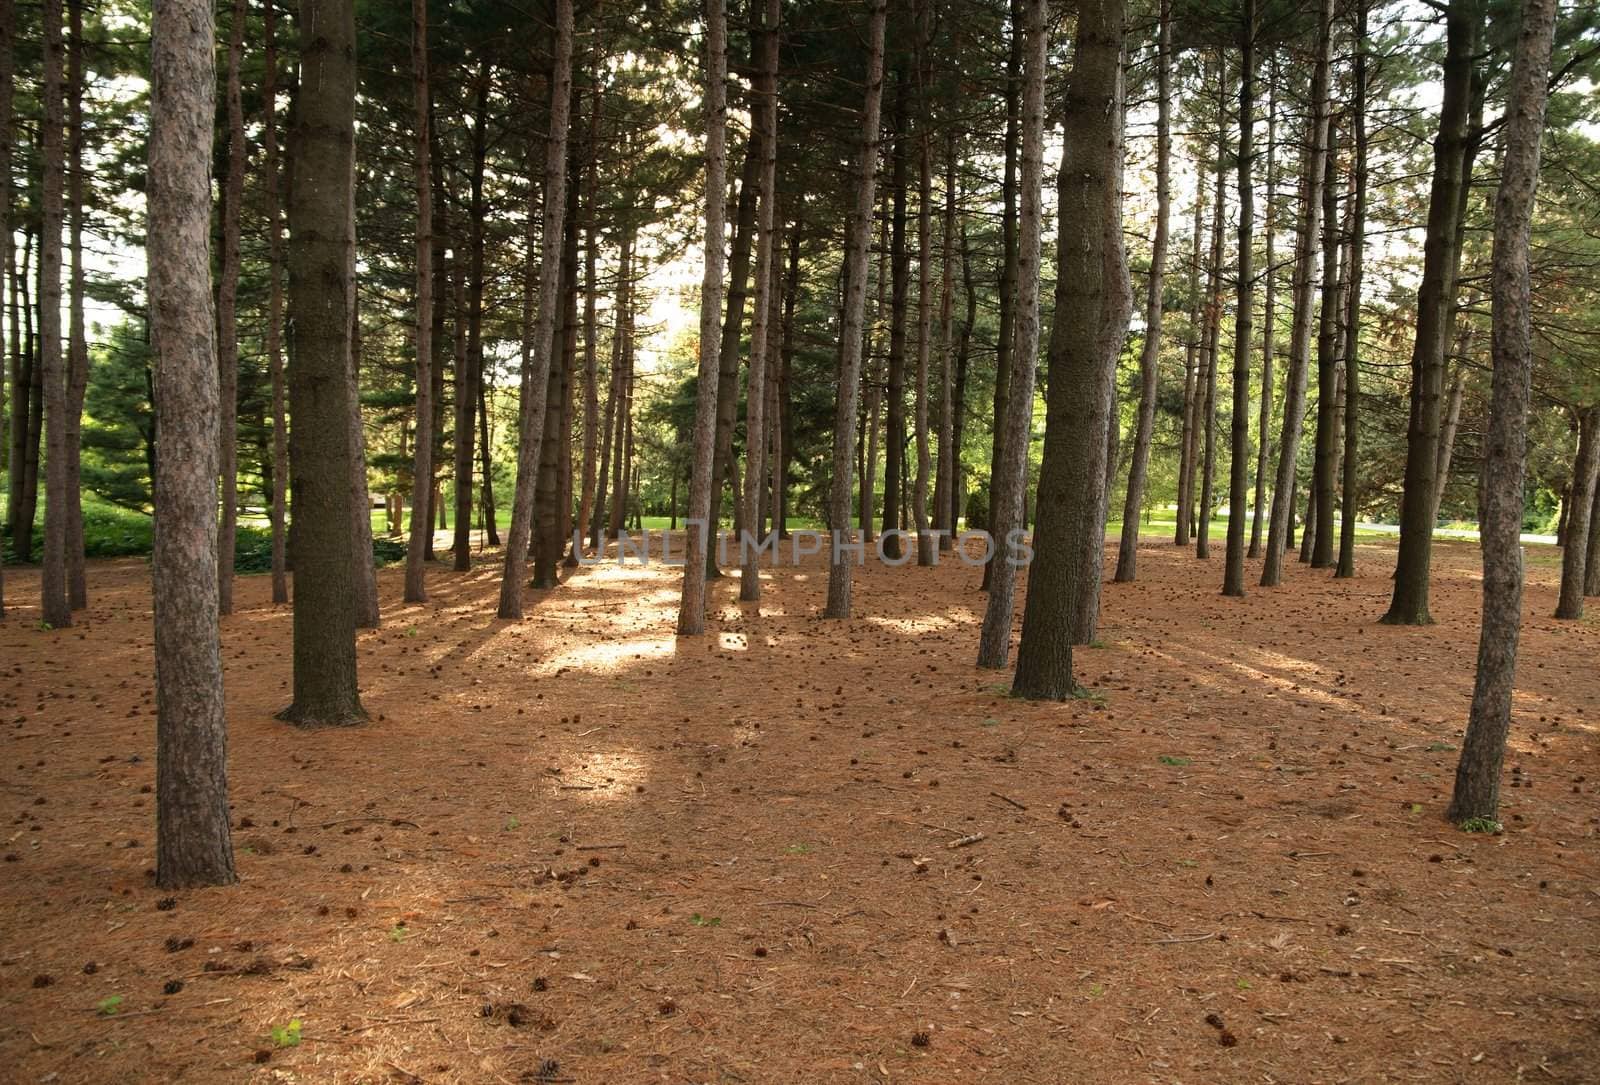 Pine forest in the sunlight during the summertime.